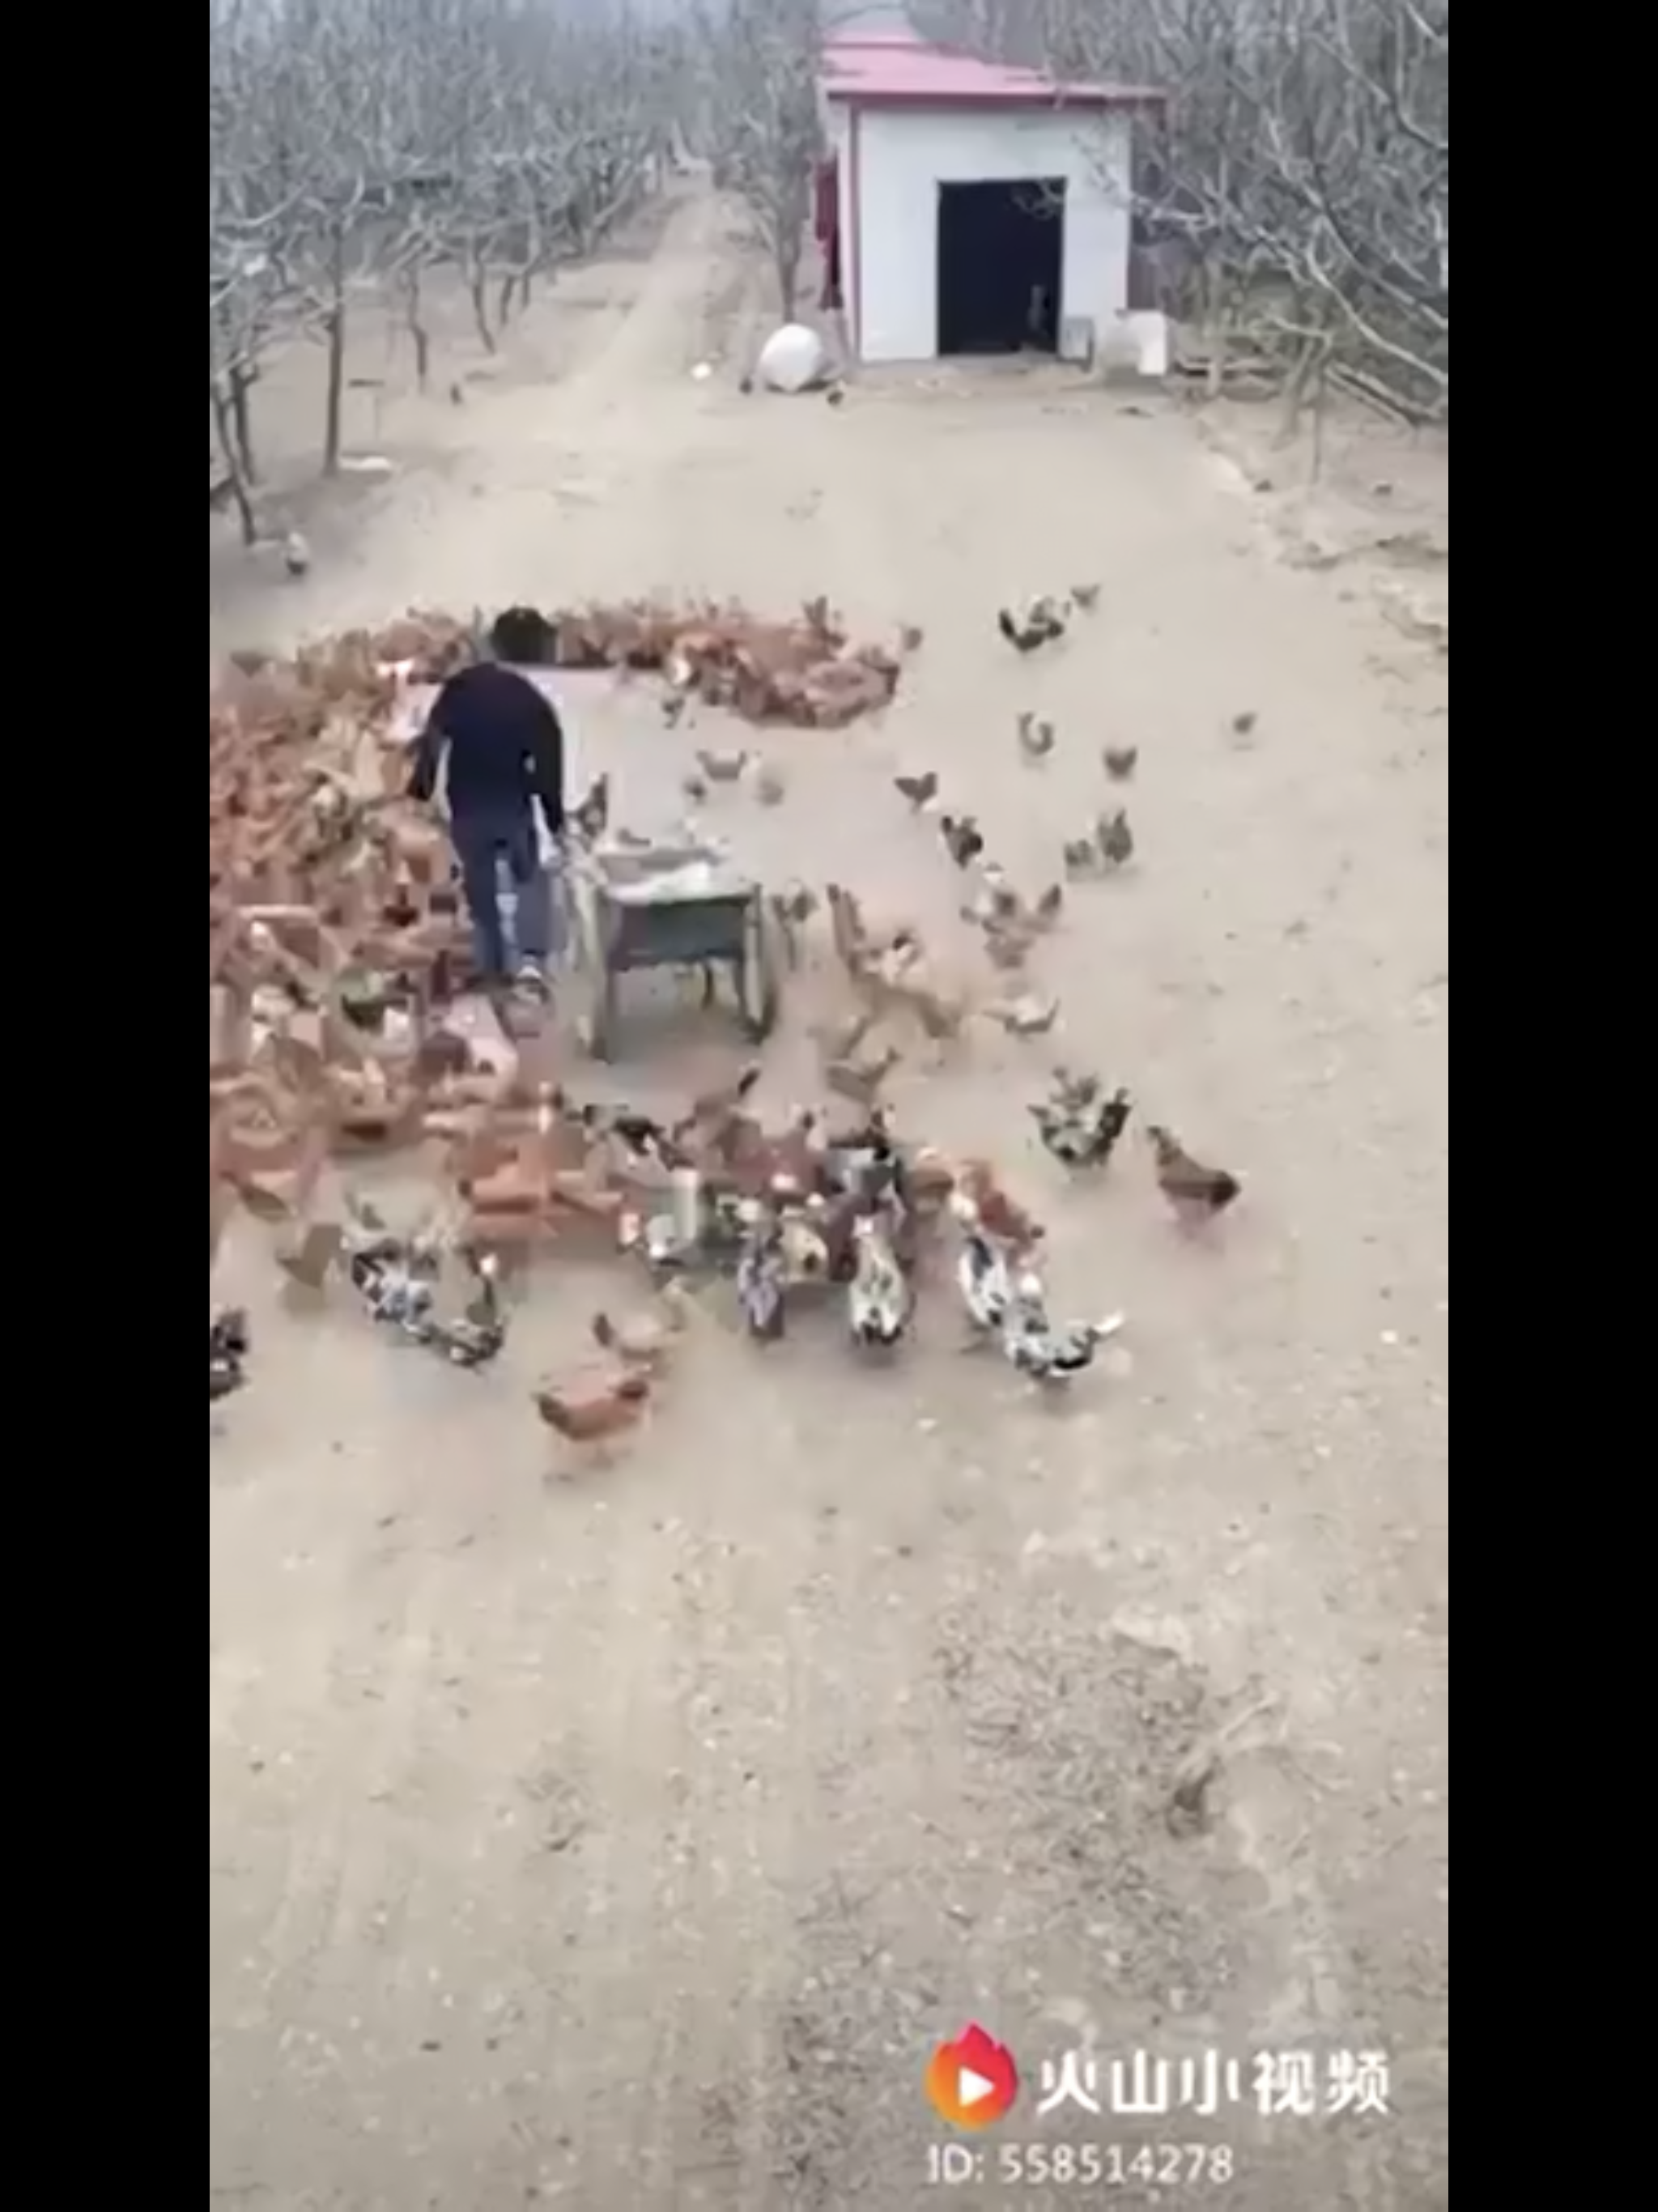 Then the 2000 chickens following him can be seen gathering around the food, forming a heart shape.